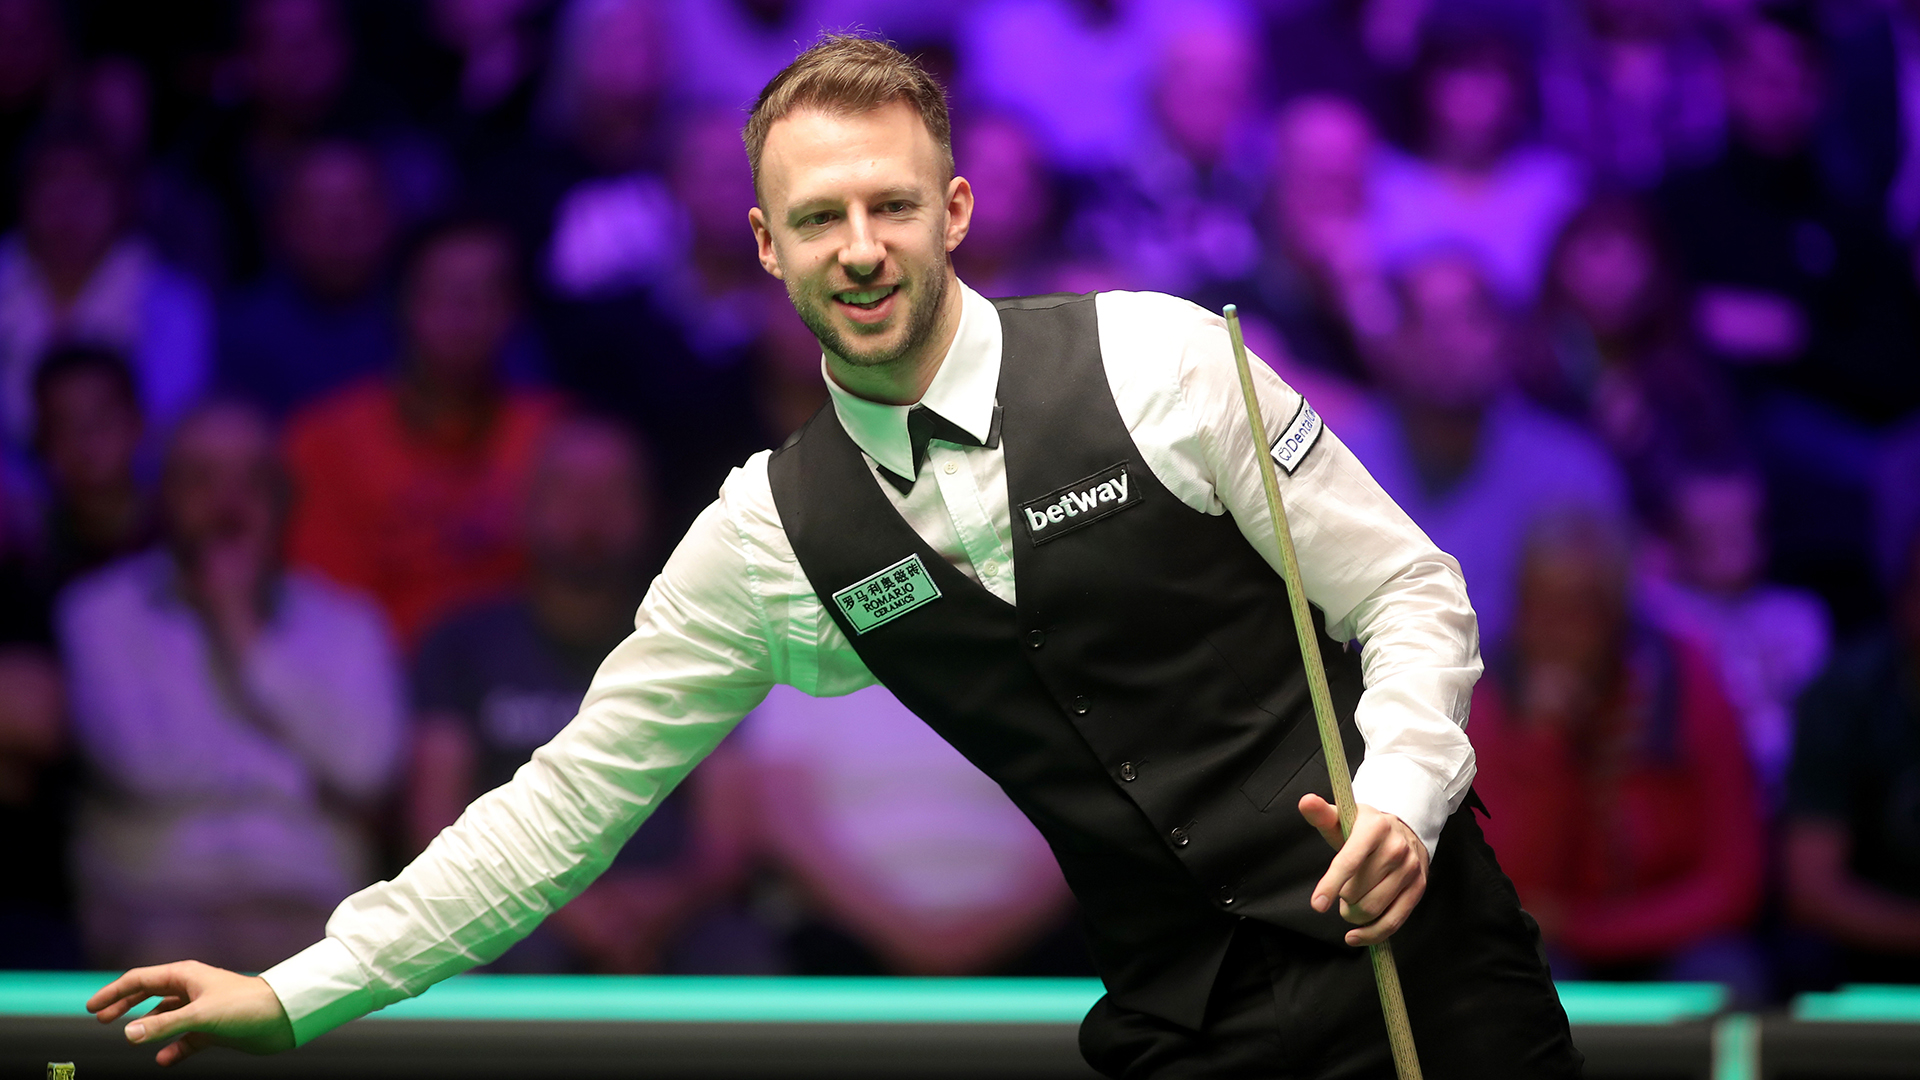 Snooker results Judd Trump in dramatic comeback against Stephen Maguire to reach Players Championship final